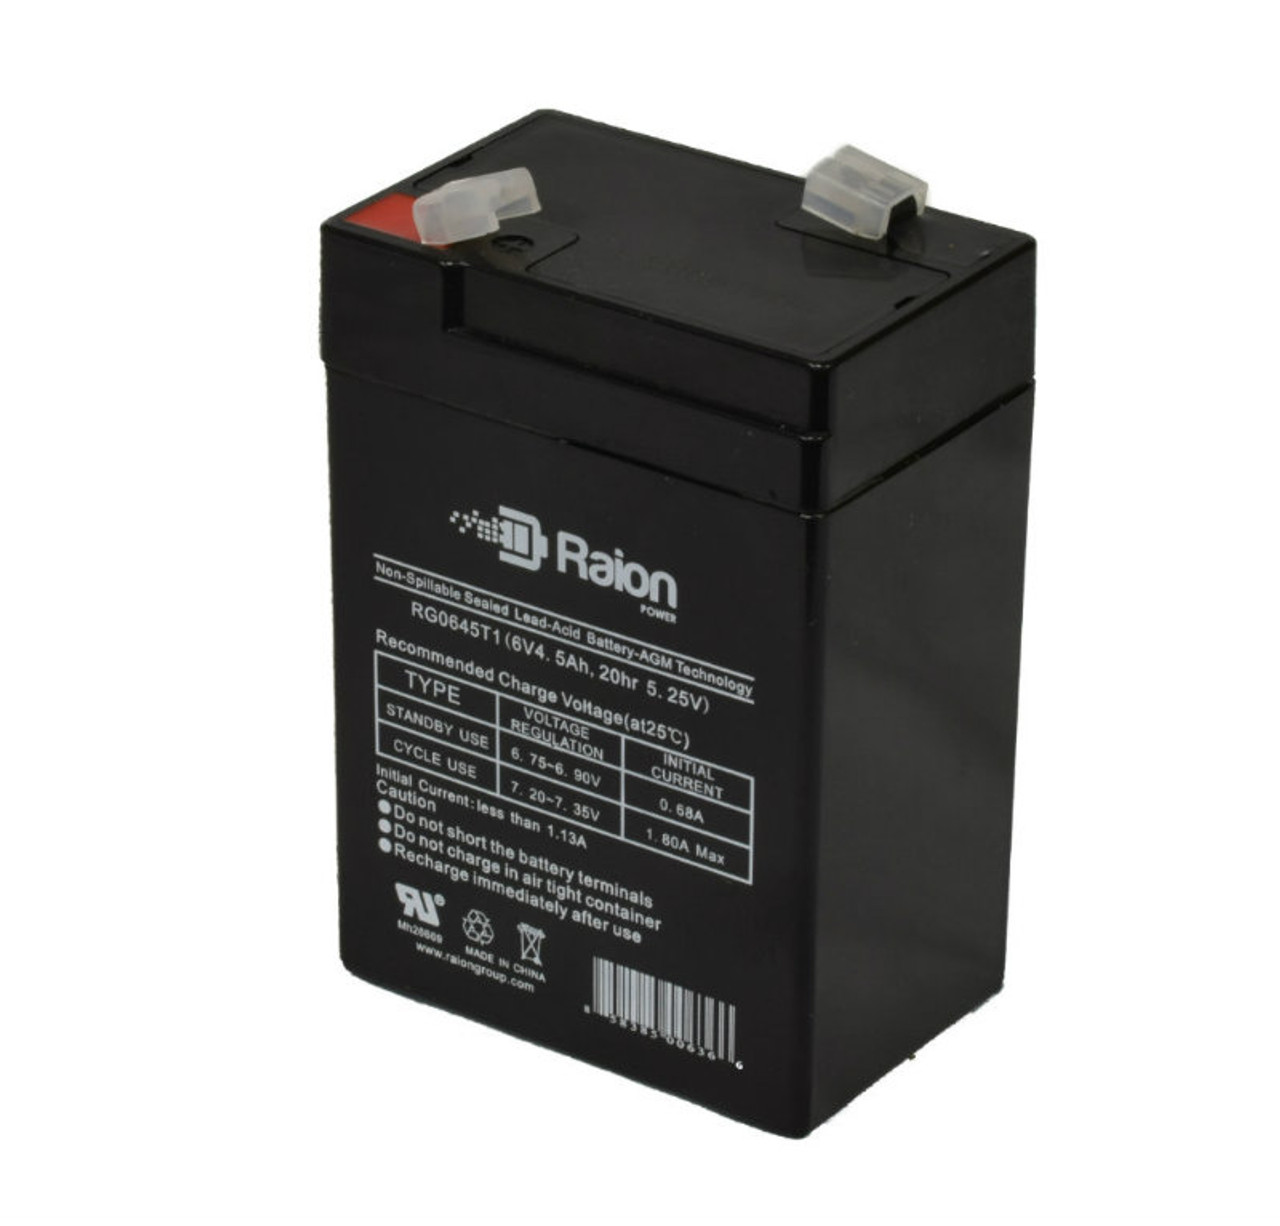 Raion Power RG0645T1 6V 4.5Ah Replacement Battery Cartridge for Power Wheels YP4-6WL